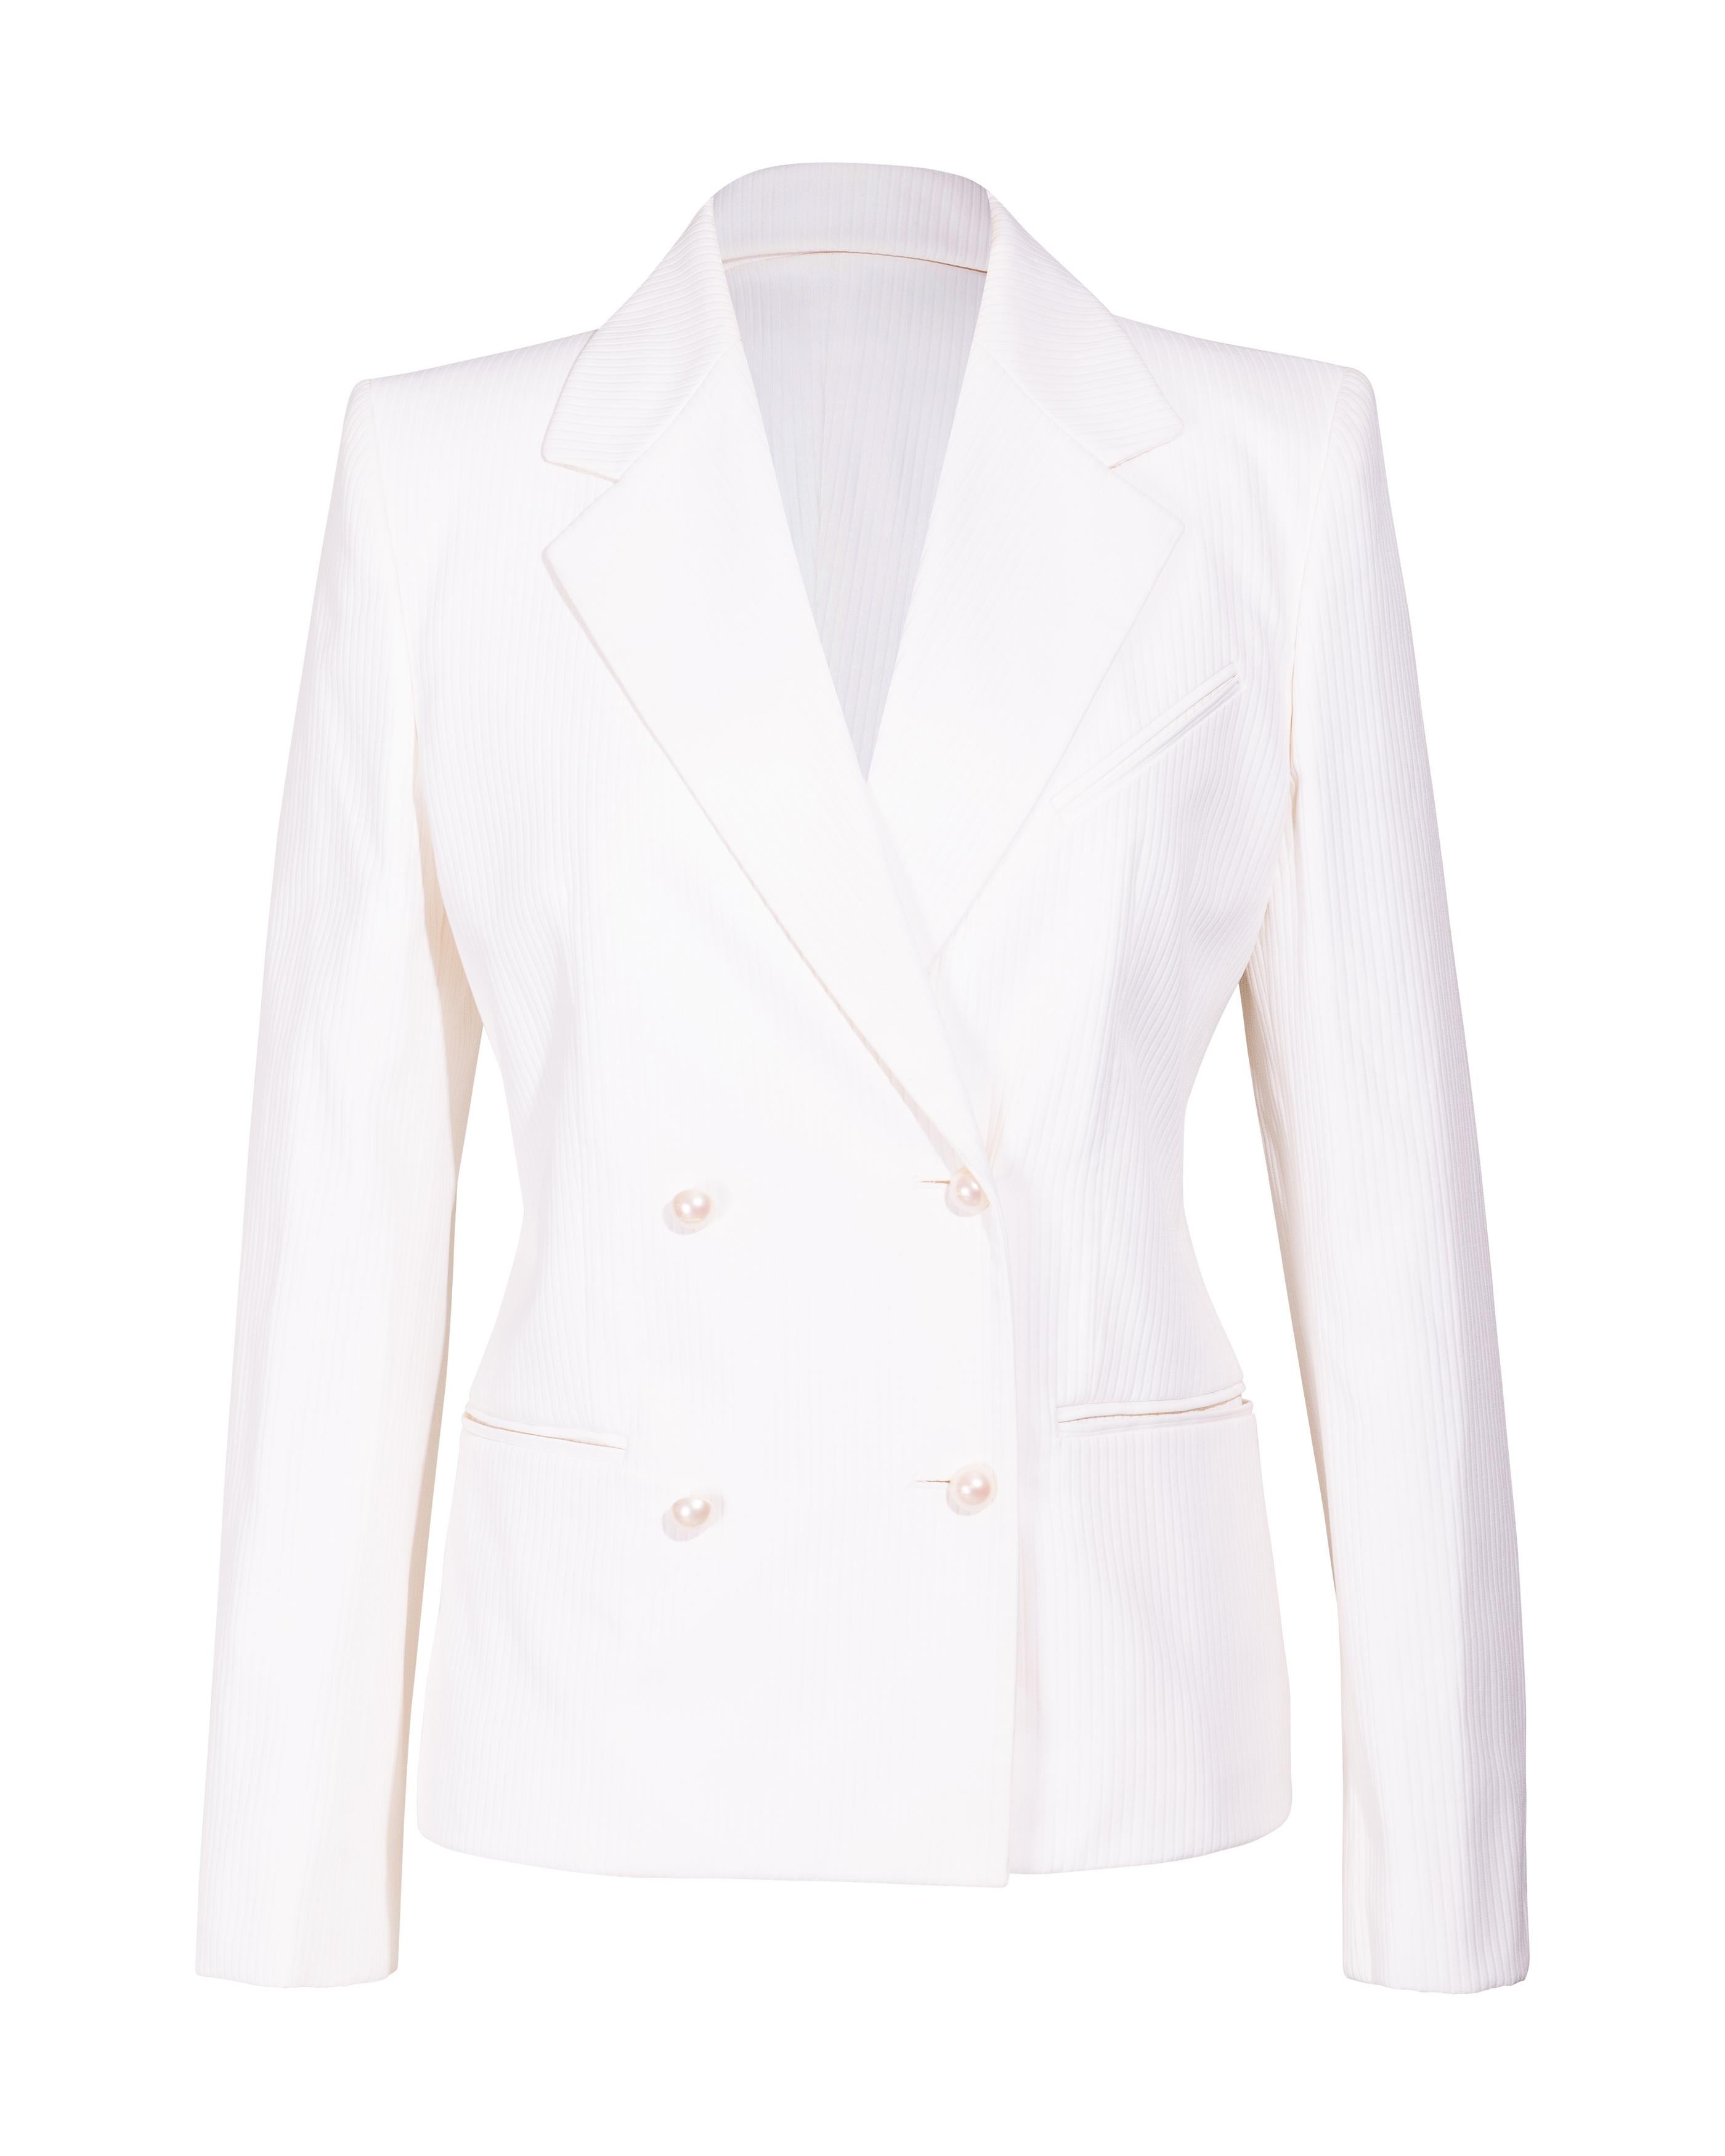 Women's S/S 2001 Chanel Double-Breasted White Suit Set